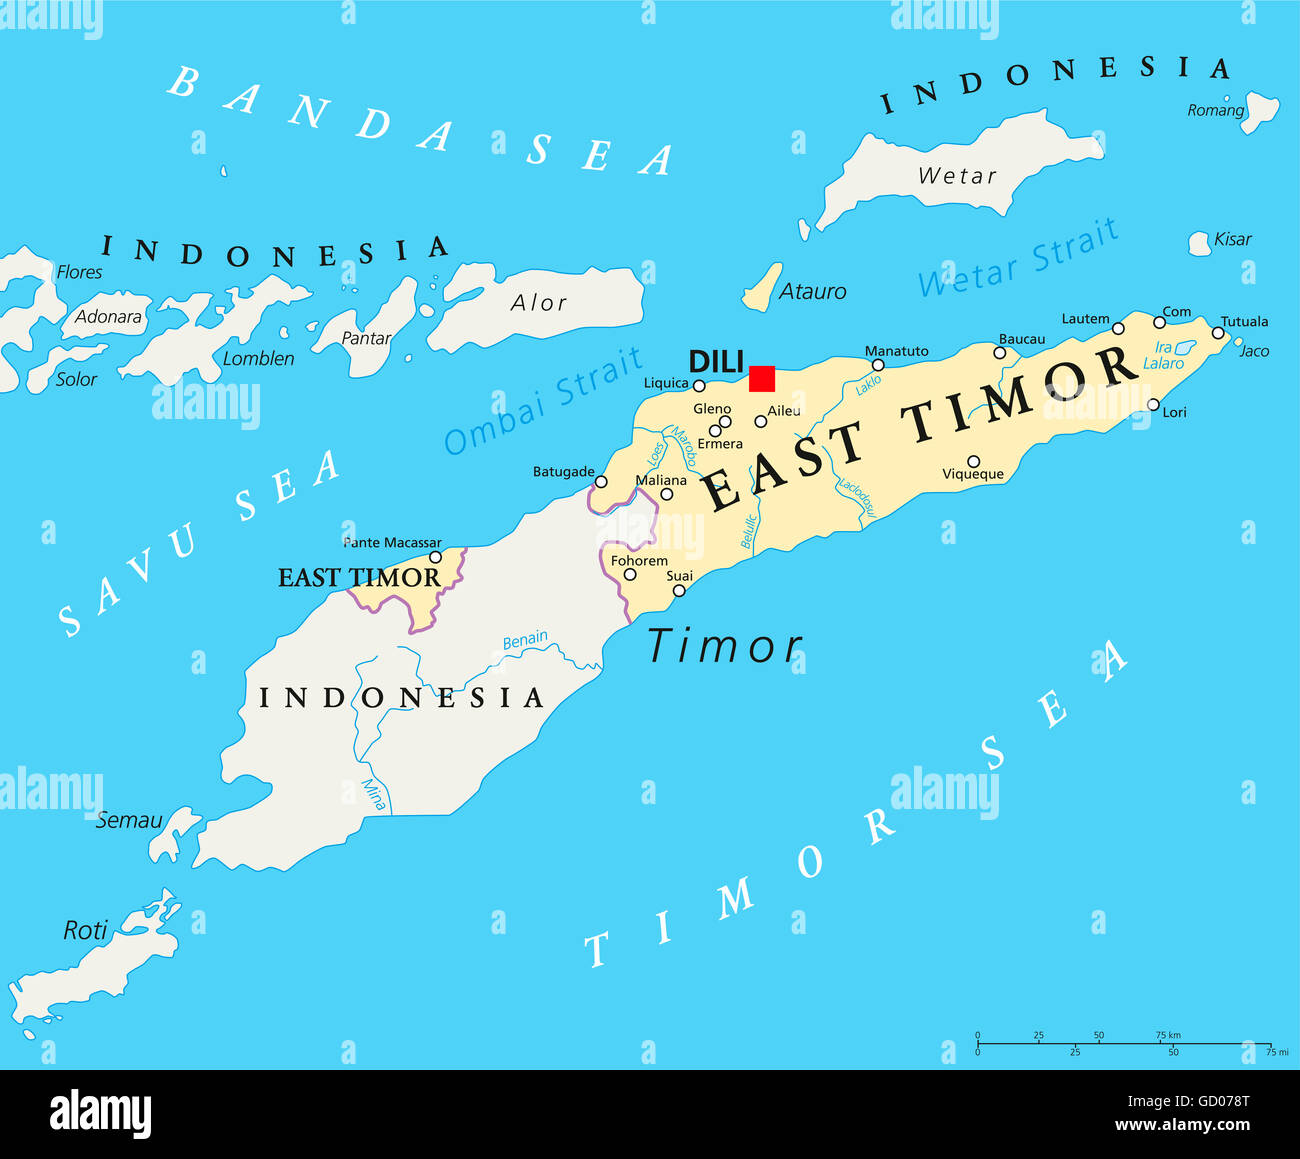 East Timor political map with capital Dili, national borders, important cities and rivers. Also known as Timor Leste. Stock Photo